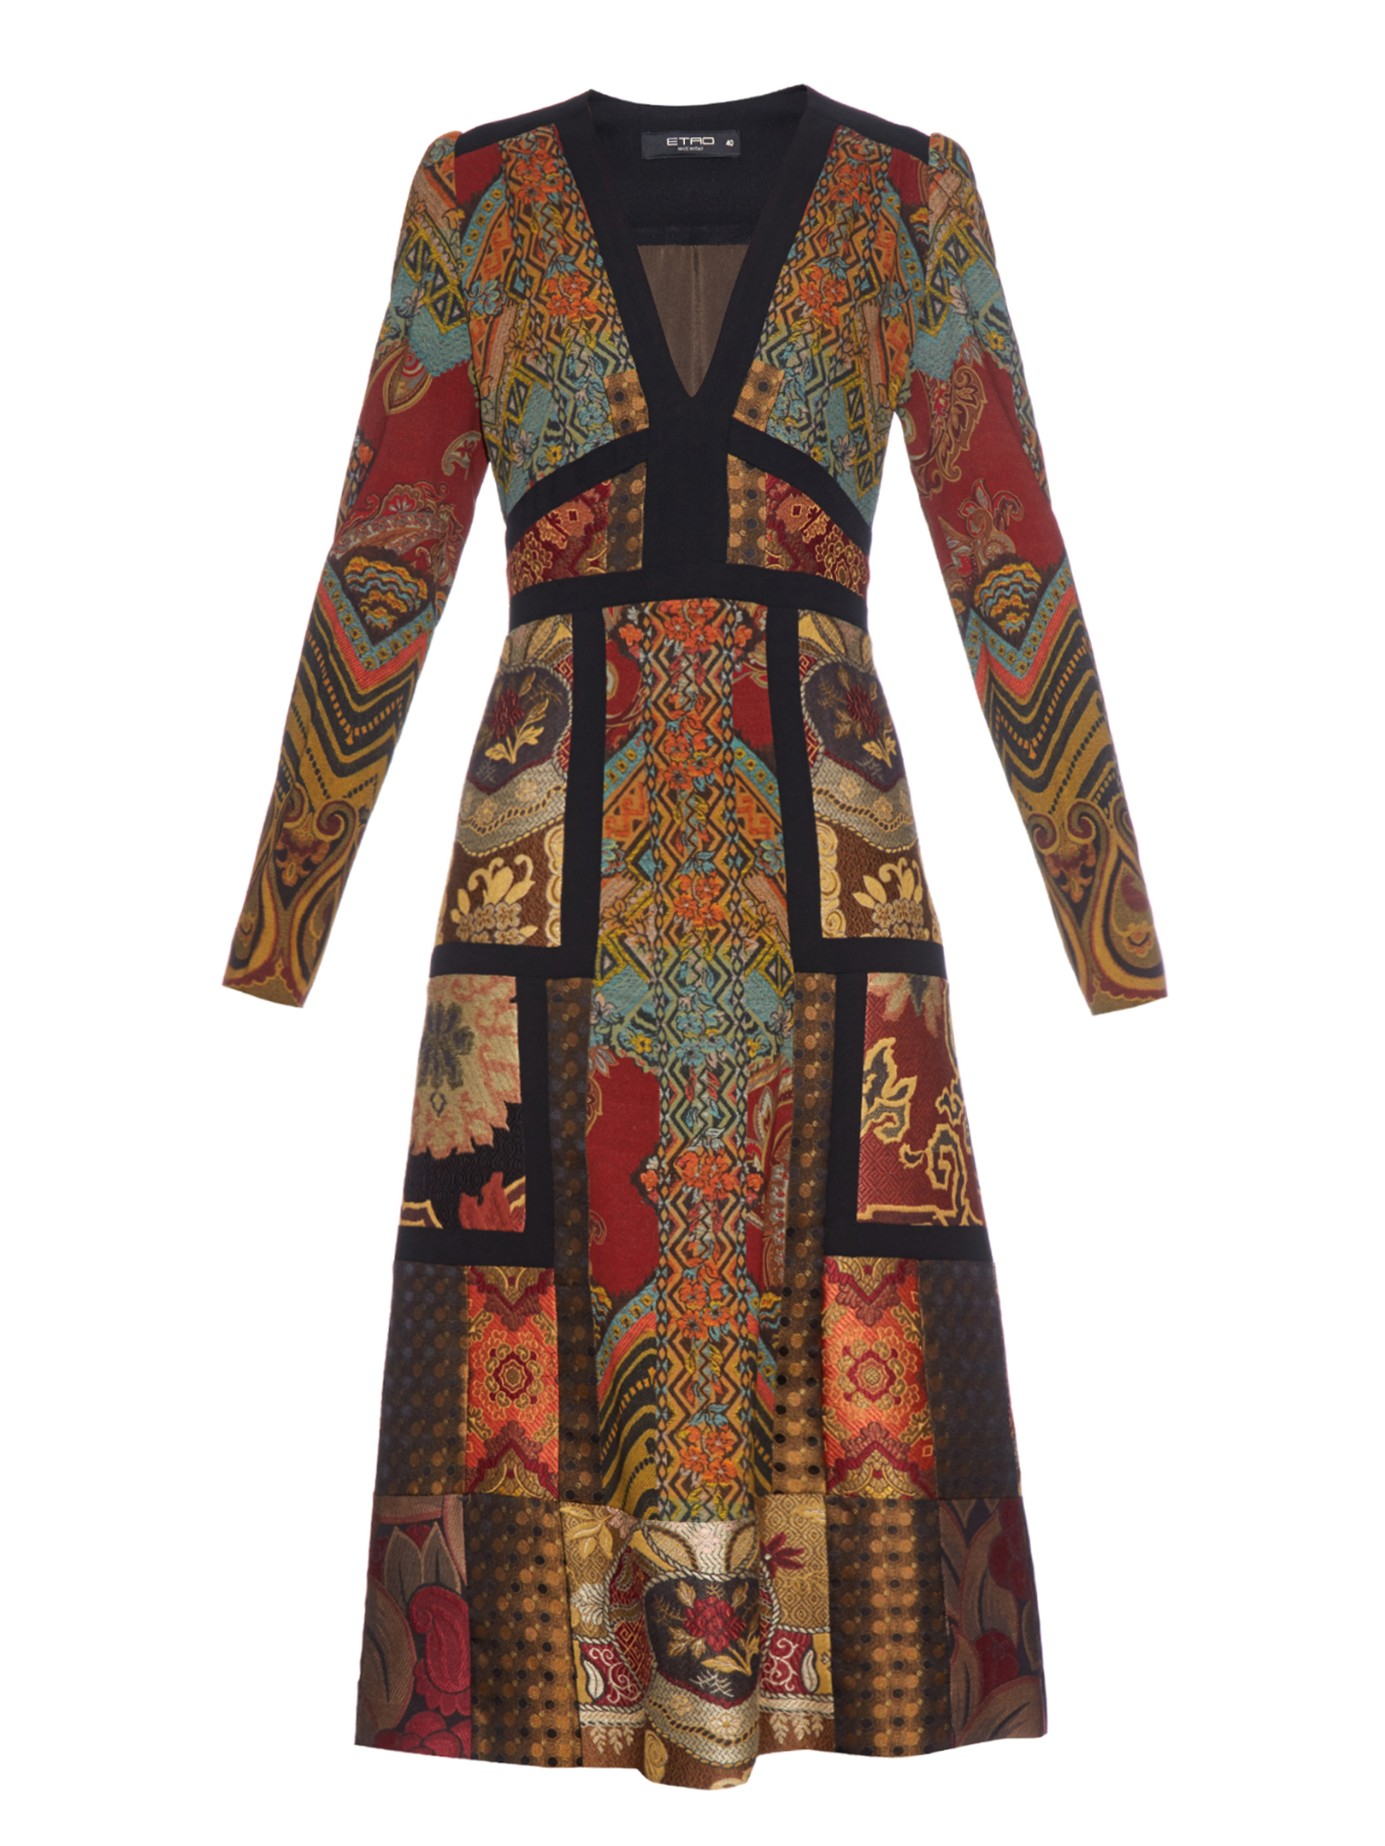 Lyst - Etro Patchwork Printed Crepe And Jacquard Dress in Red